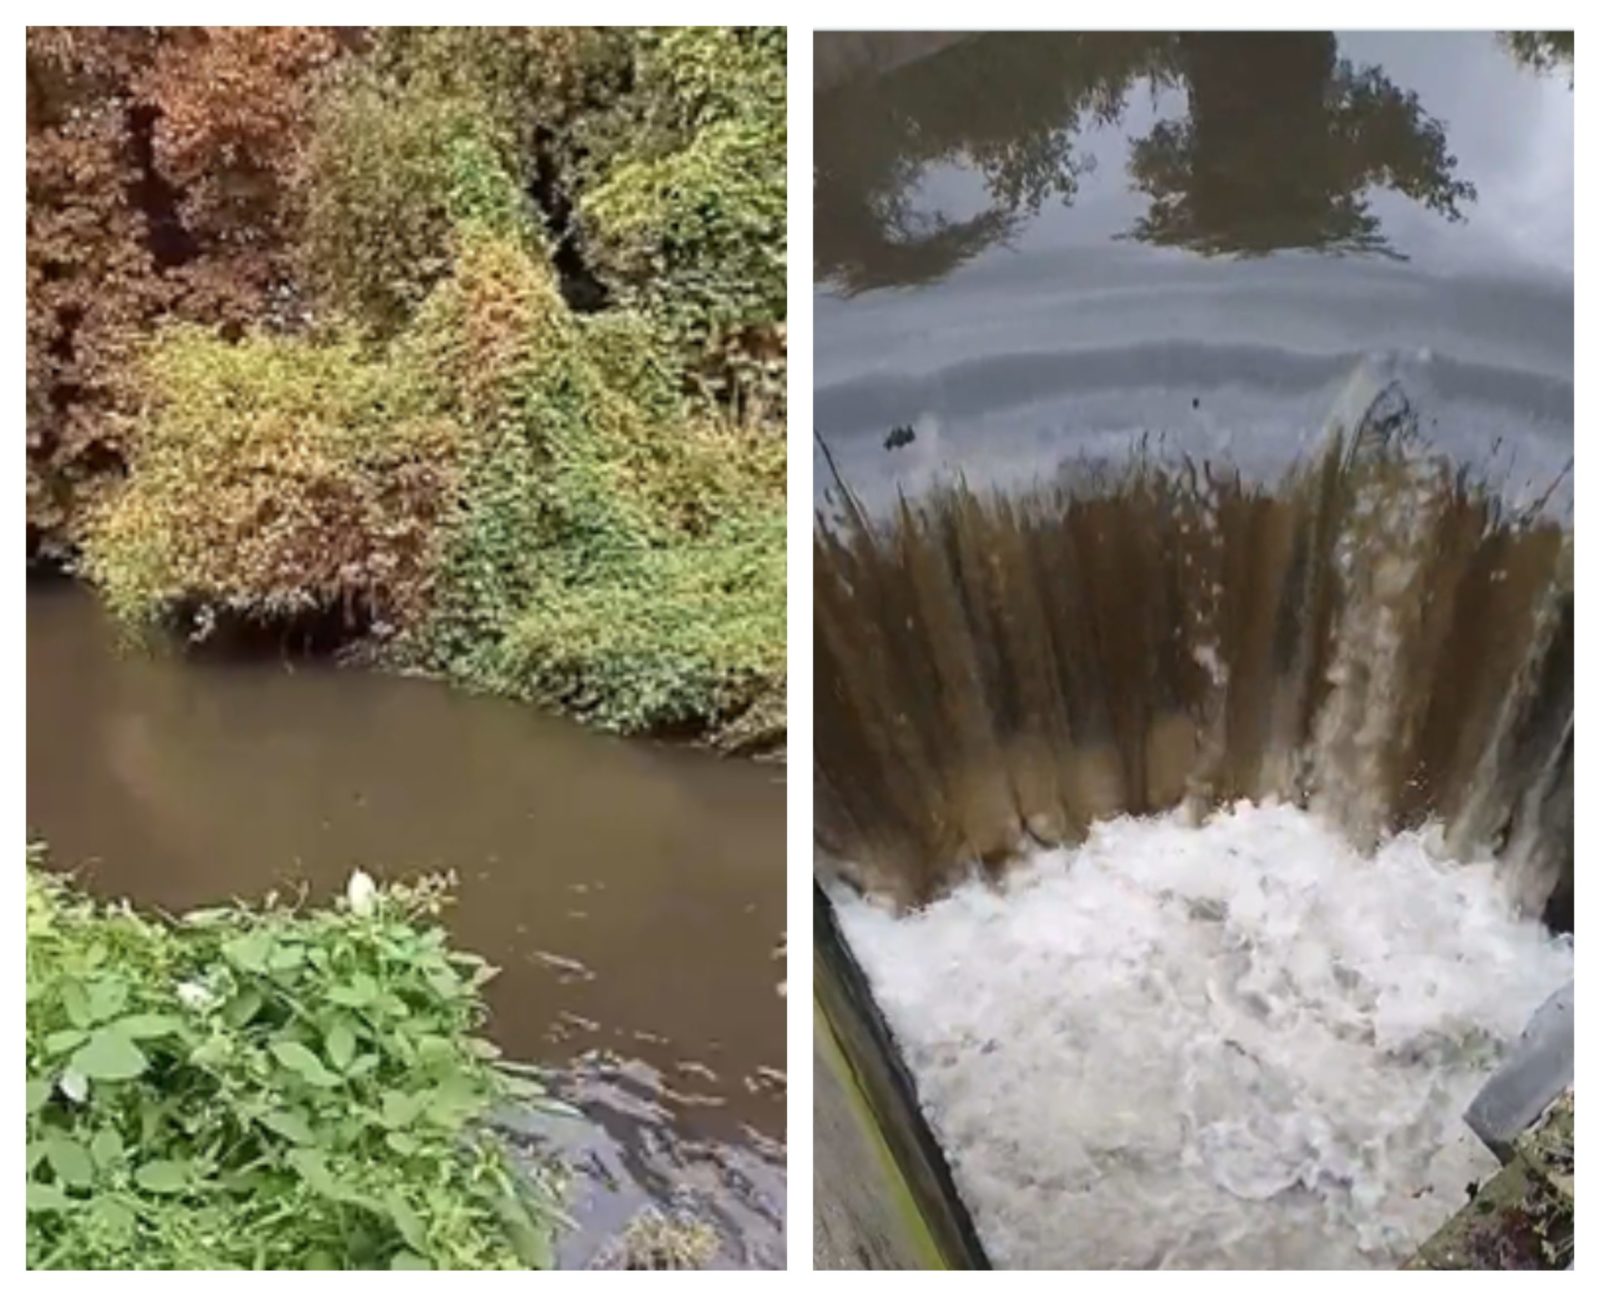 Images of pollution in the River Wandle - August 2022. 